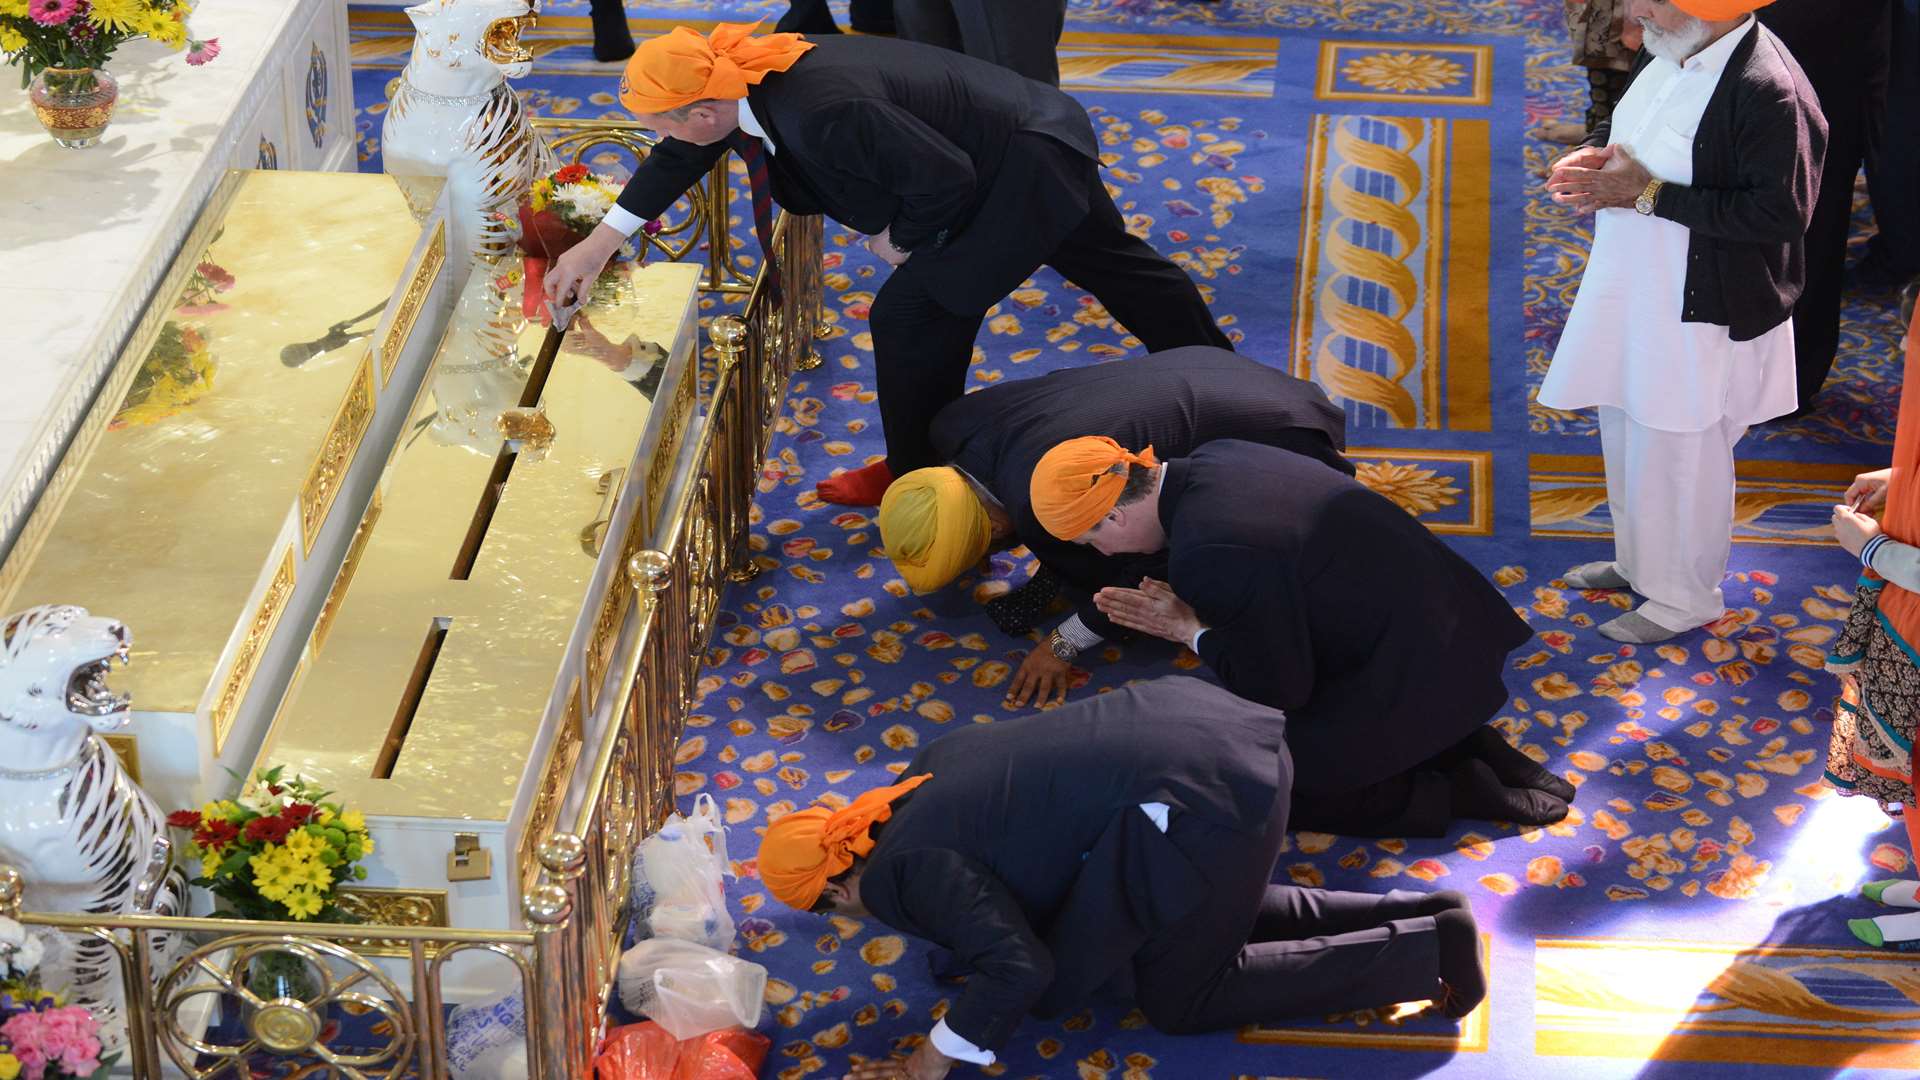 David Cameron (Centre) kneels at the altar in the Gurdwara at the Sikh festival of Vaisakhi in Gravesend Picture: Gary Browne